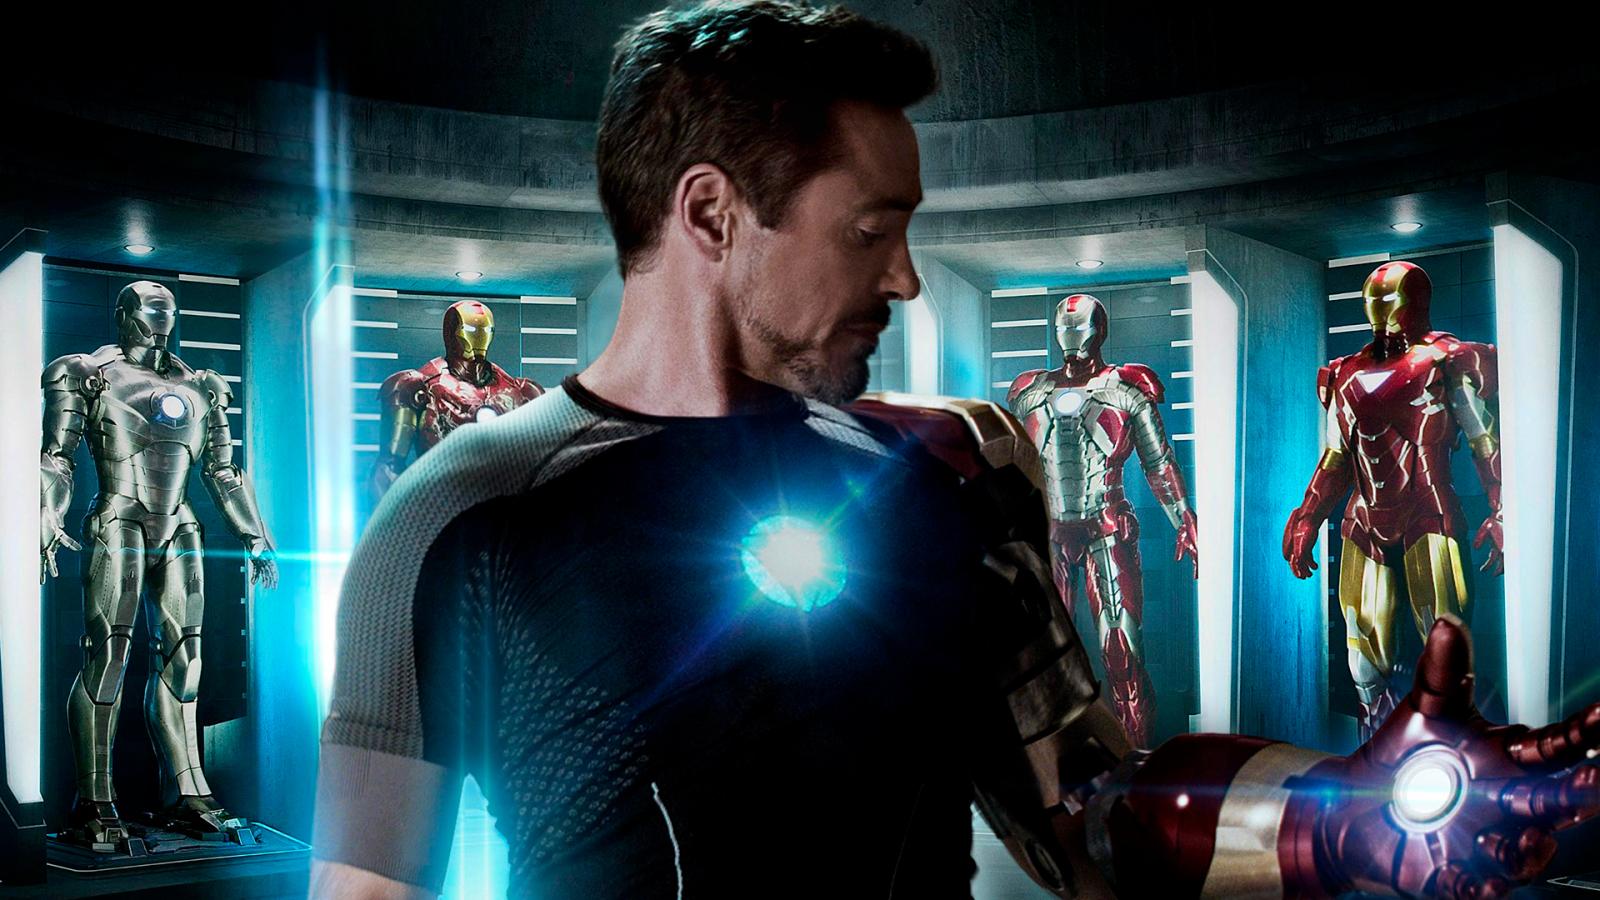 Marvel Fans Hate the News of Robert Downey Jr. Coming Back as Iron Man - image 1